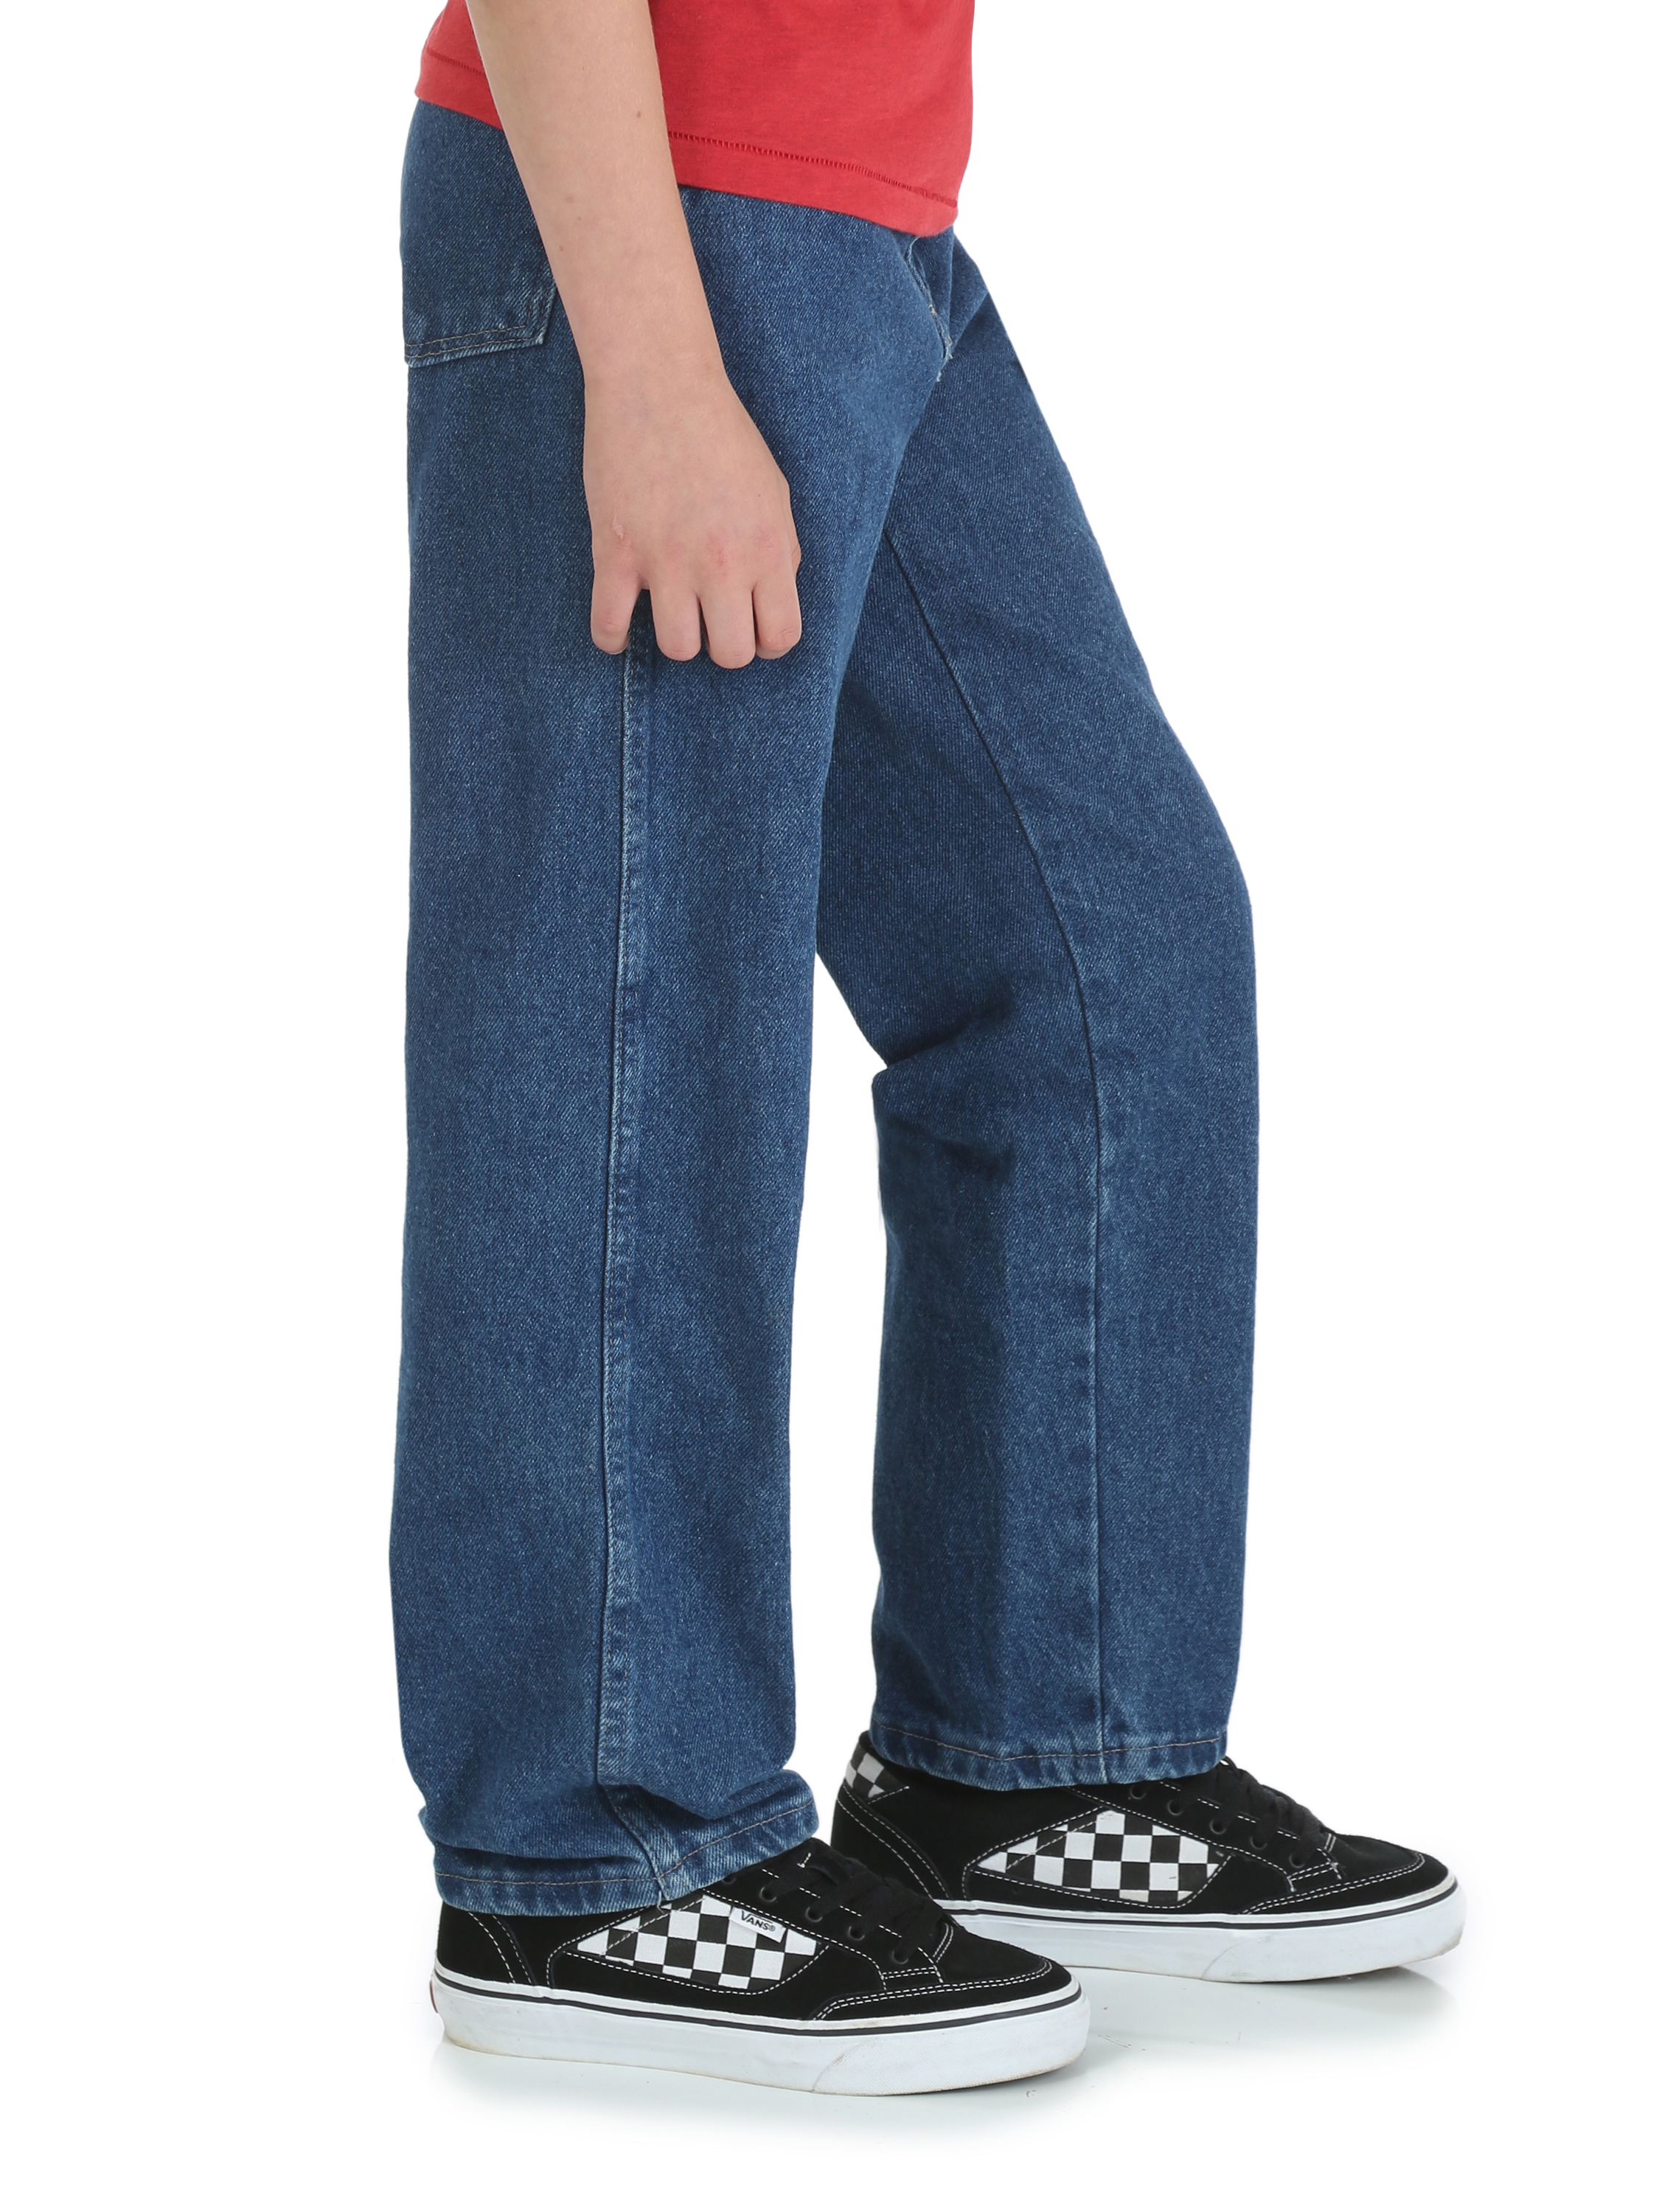 Rustler Boys Relaxed Fit Jeans, Sizes 4-16 & Husky - image 2 of 5